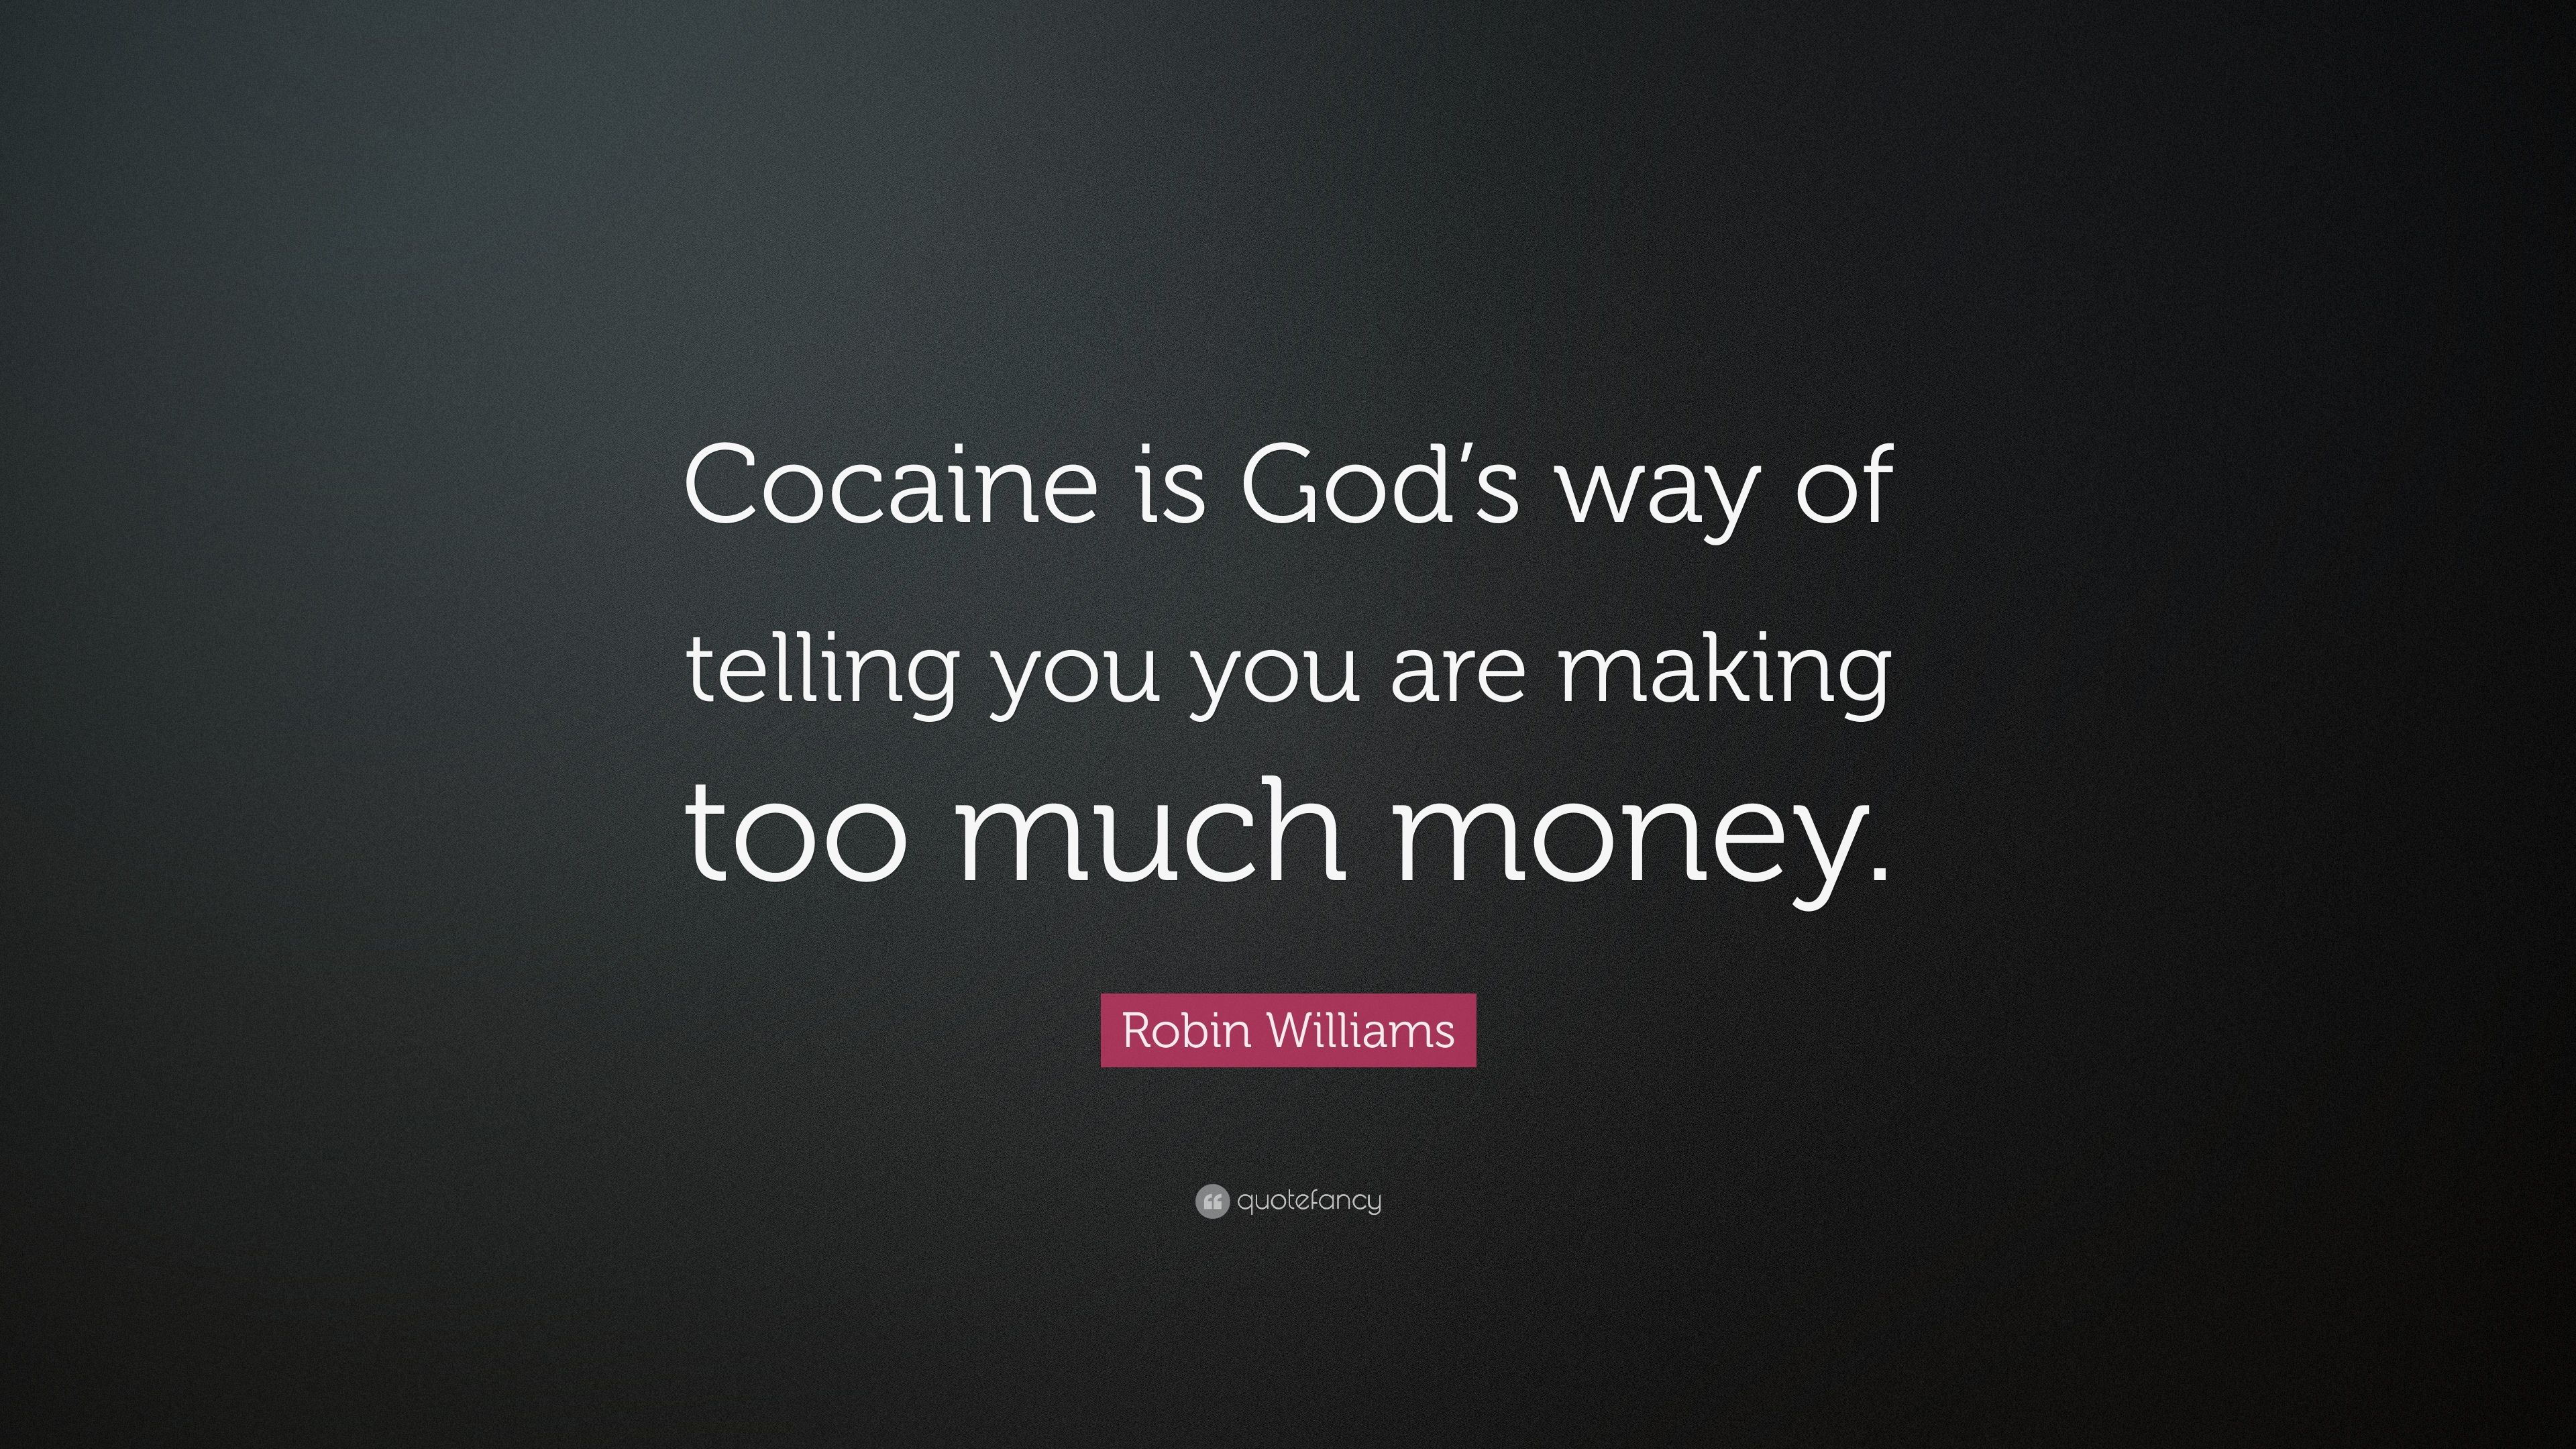 Robin Williams Quote: “Cocaine is God's way of telling you you are